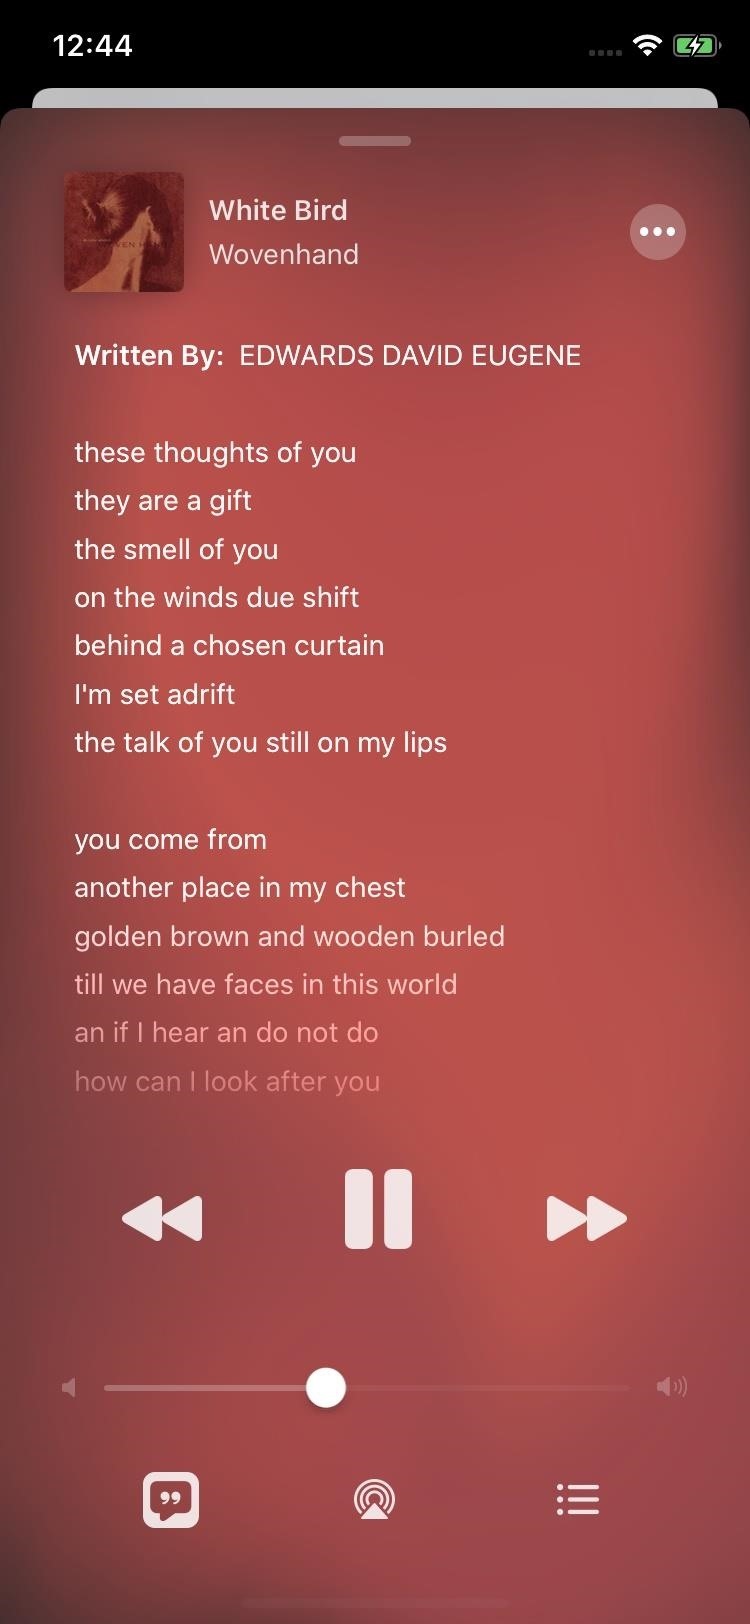 View Moving, Time-Synced Lyrics in Apple Music to Sing Along to Your Favorite Songs in iOS 13